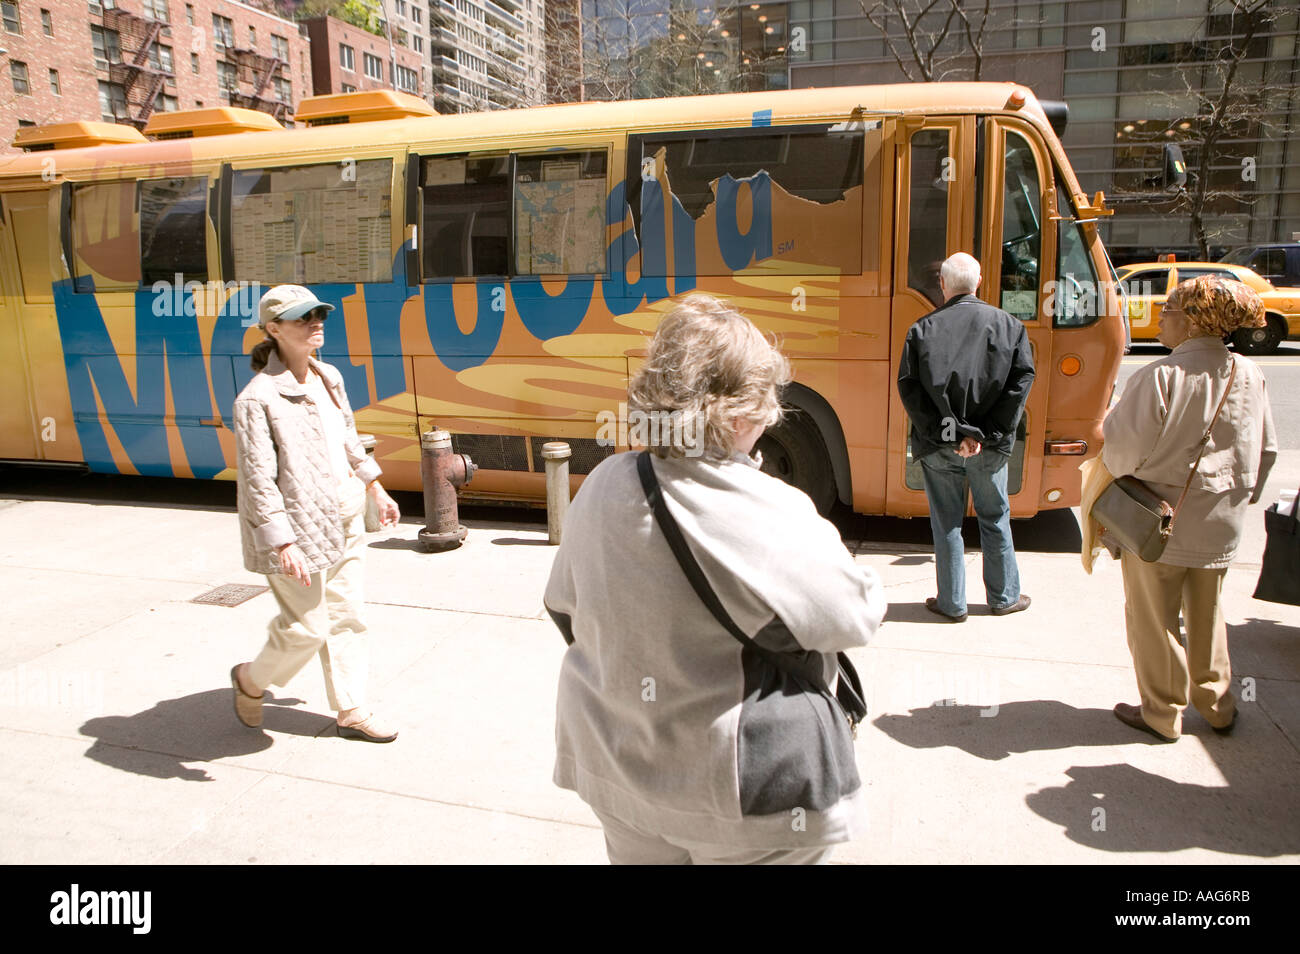 People wait to enter a Metrocard bus in a street in New York City USA April 2006 Stock Photo